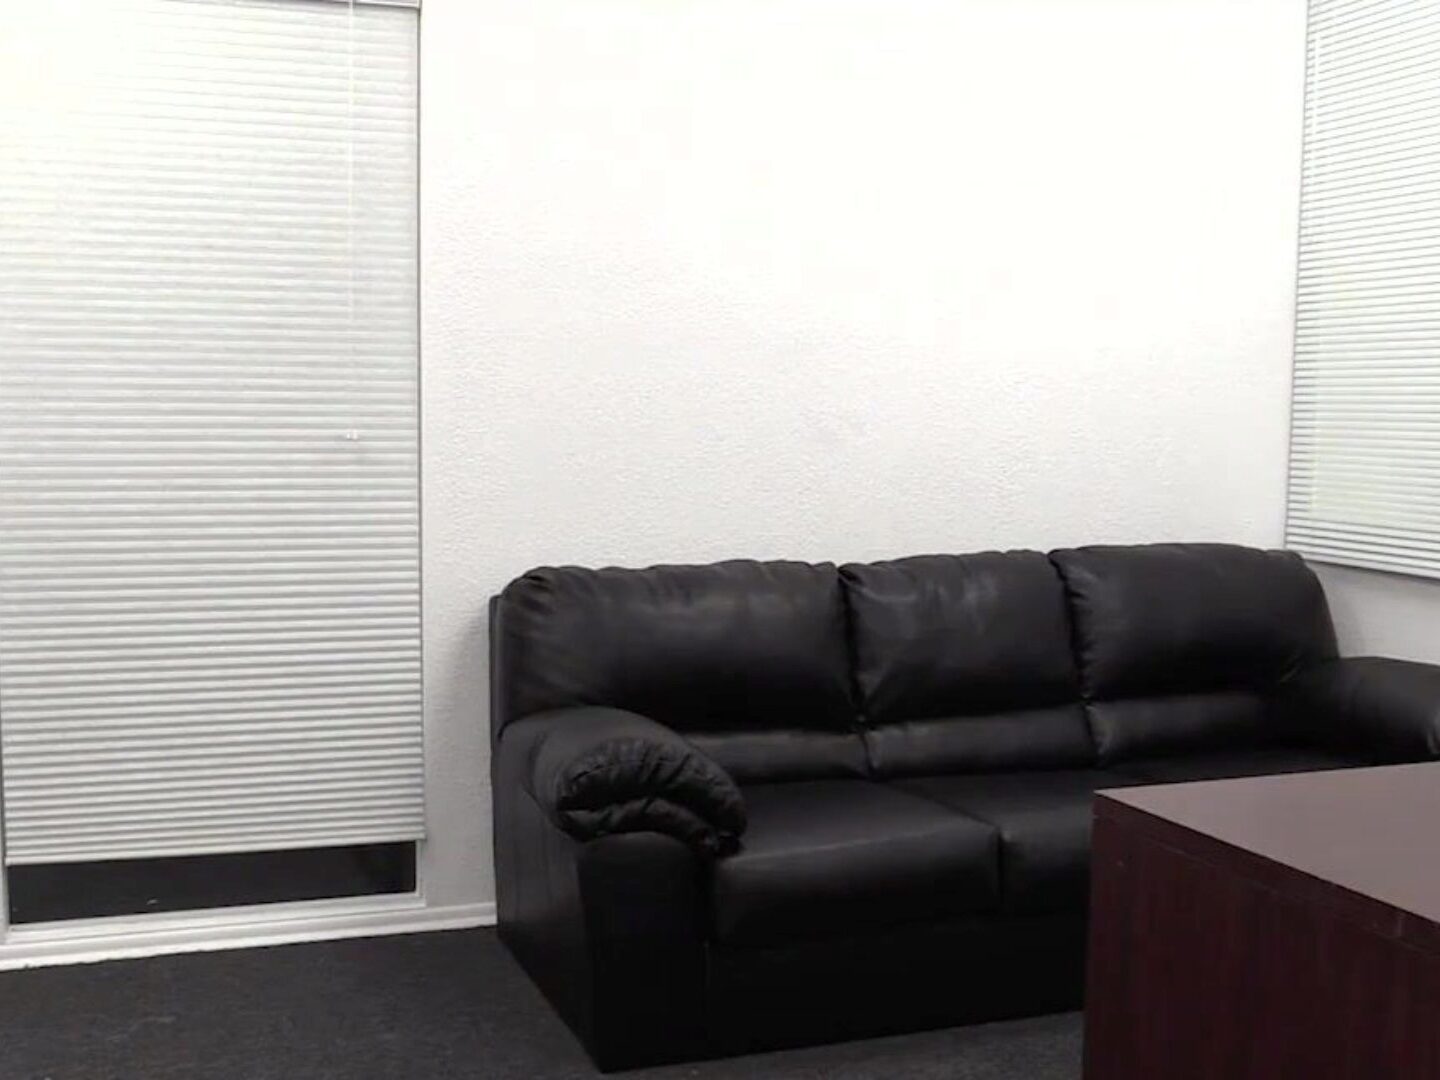 Backroom Casting Couch Fakeagent